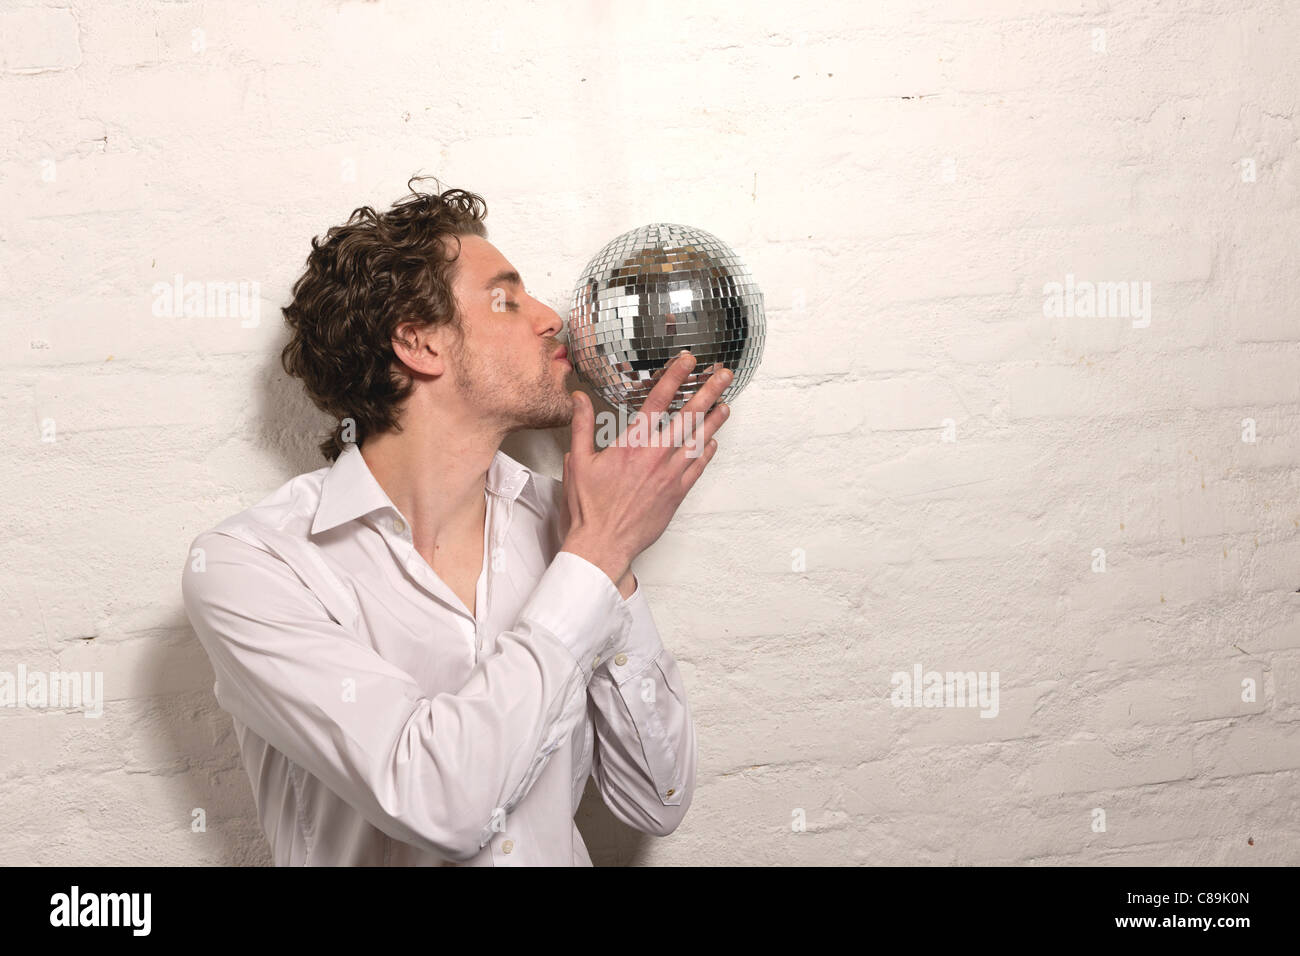 Allemagne, Hambourg, Mid adult man kissing mirror ball Banque D'Images